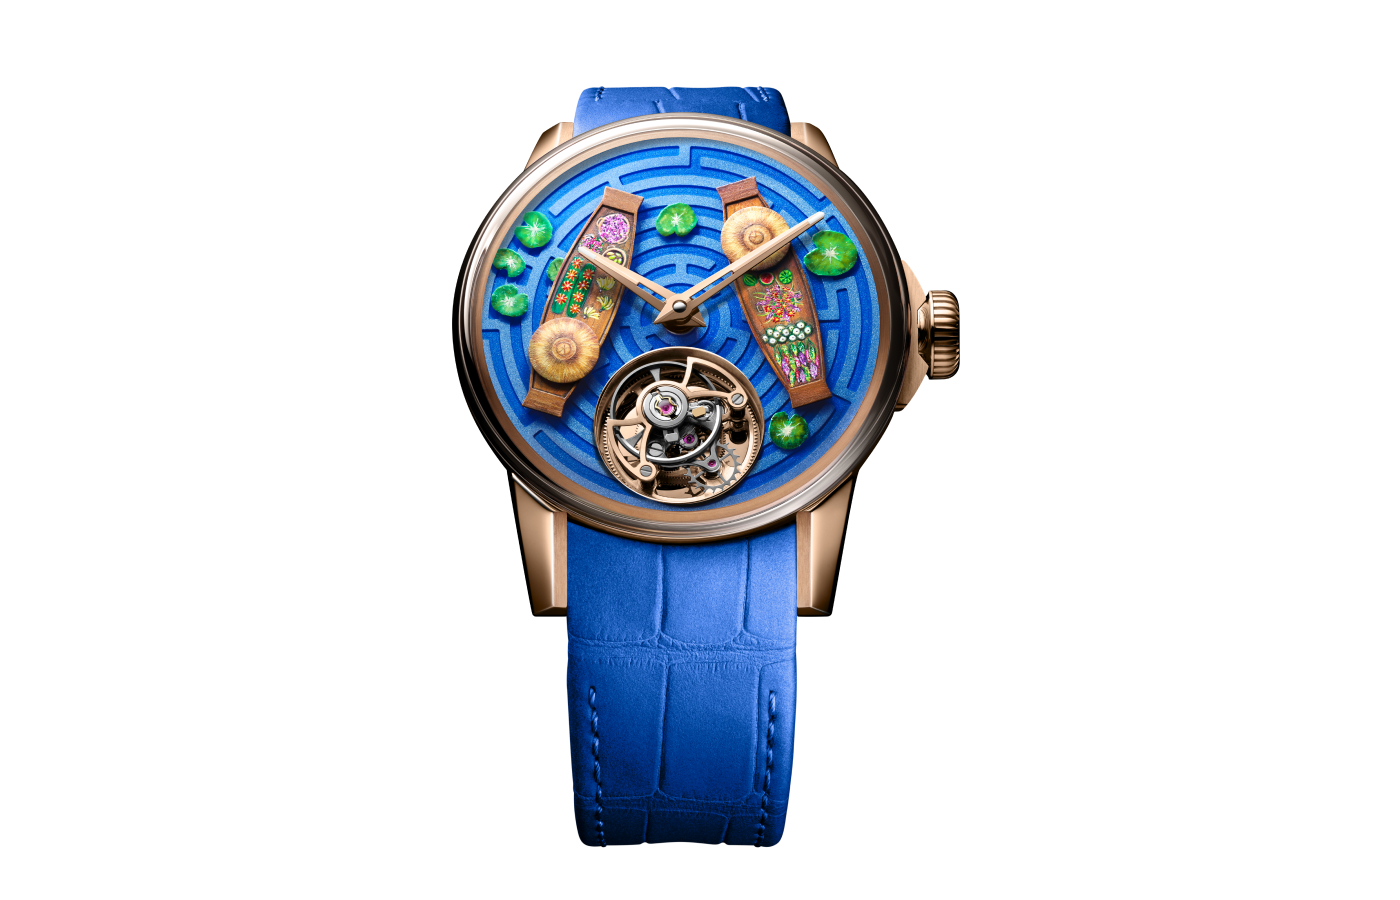 Louis Moinet Around the World Bangkok watch dial displaying a bird’s eye view labyrinth design of Bangkok’s floating market, with colourful, handmade boats, hats, and water lilies